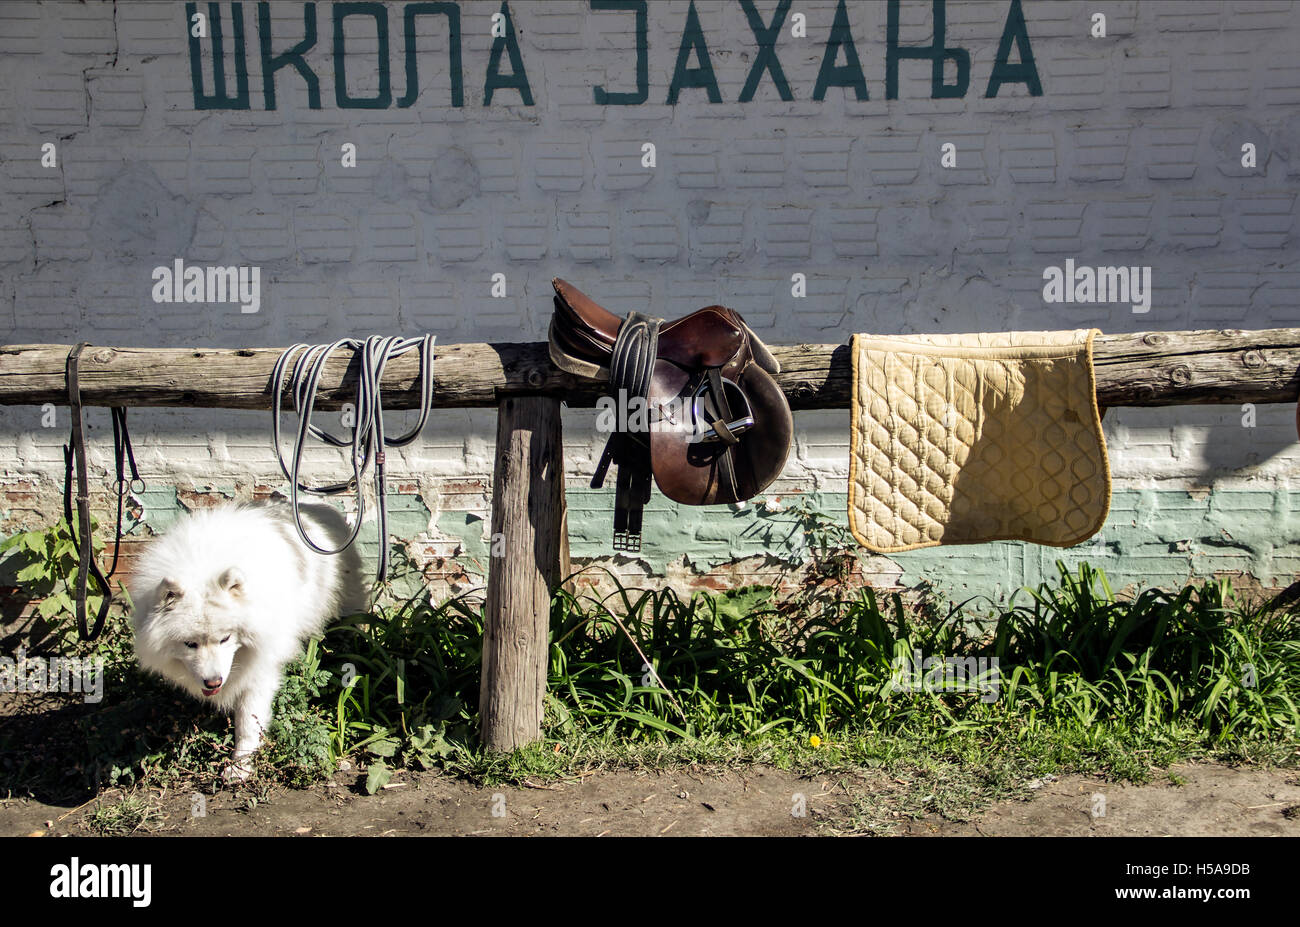 Belgrade, Serbia - A white dog snooping under a timber frame and saddle in front of the wall with sign: “Riding School” Stock Photo